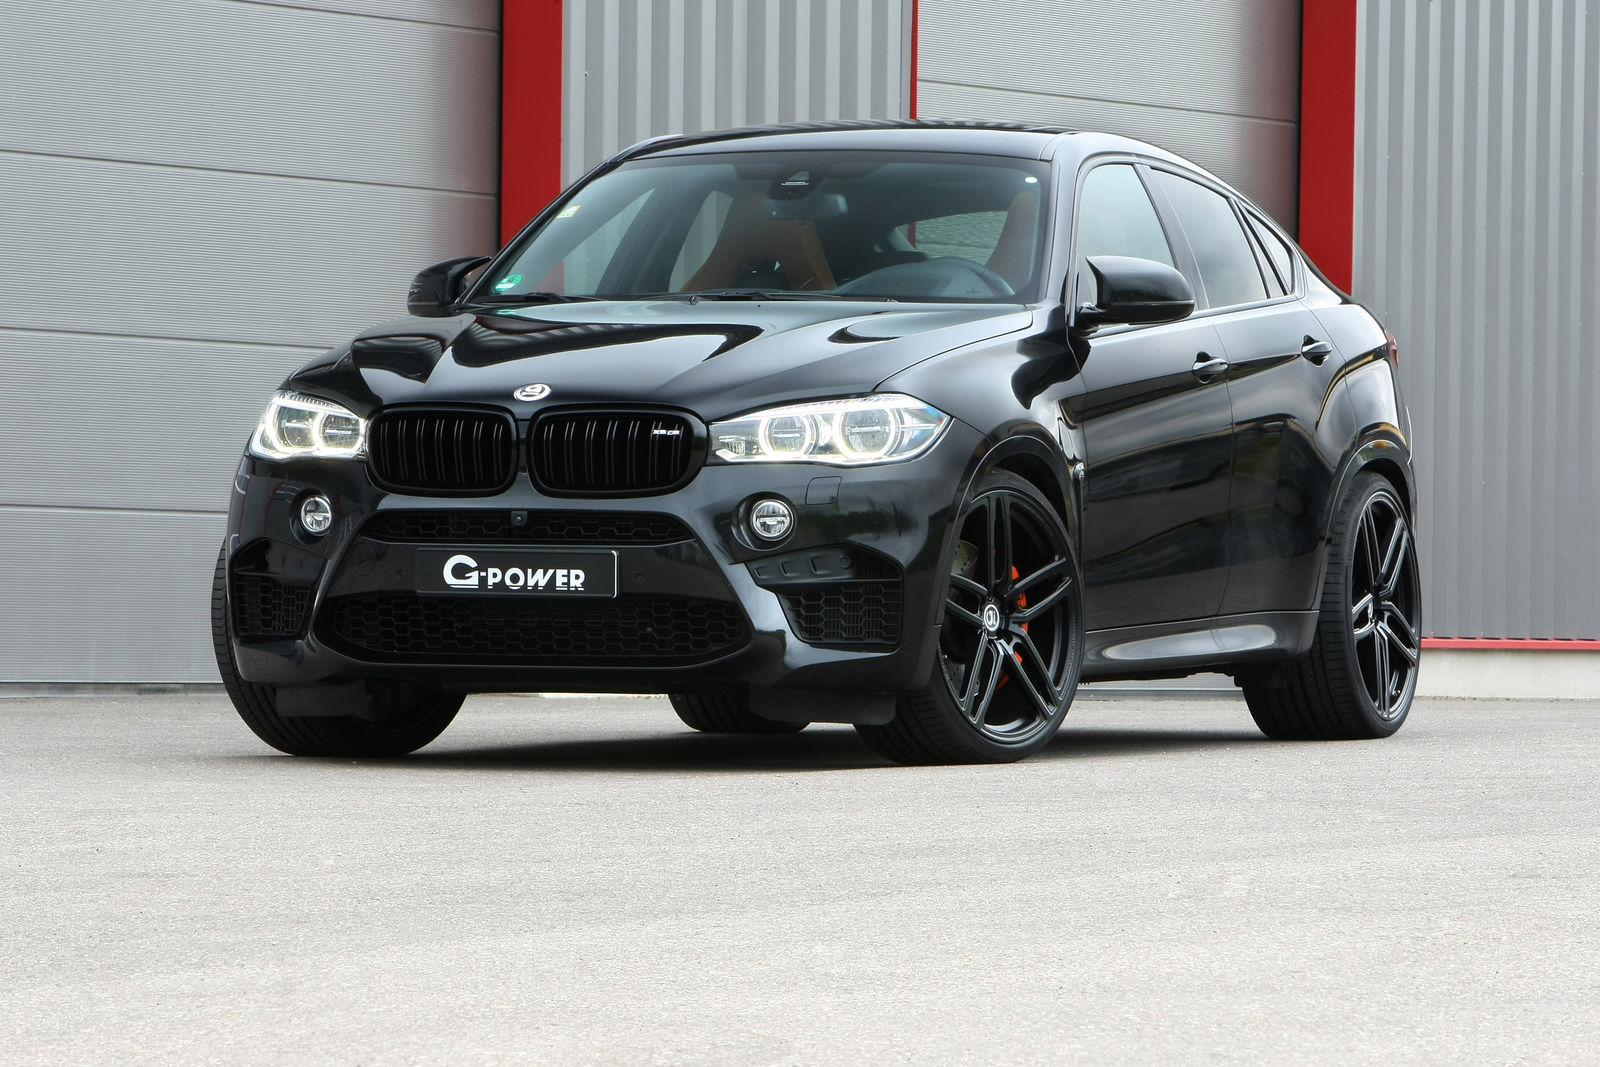 G-Power BMW X6 M delivers 739 horsepower